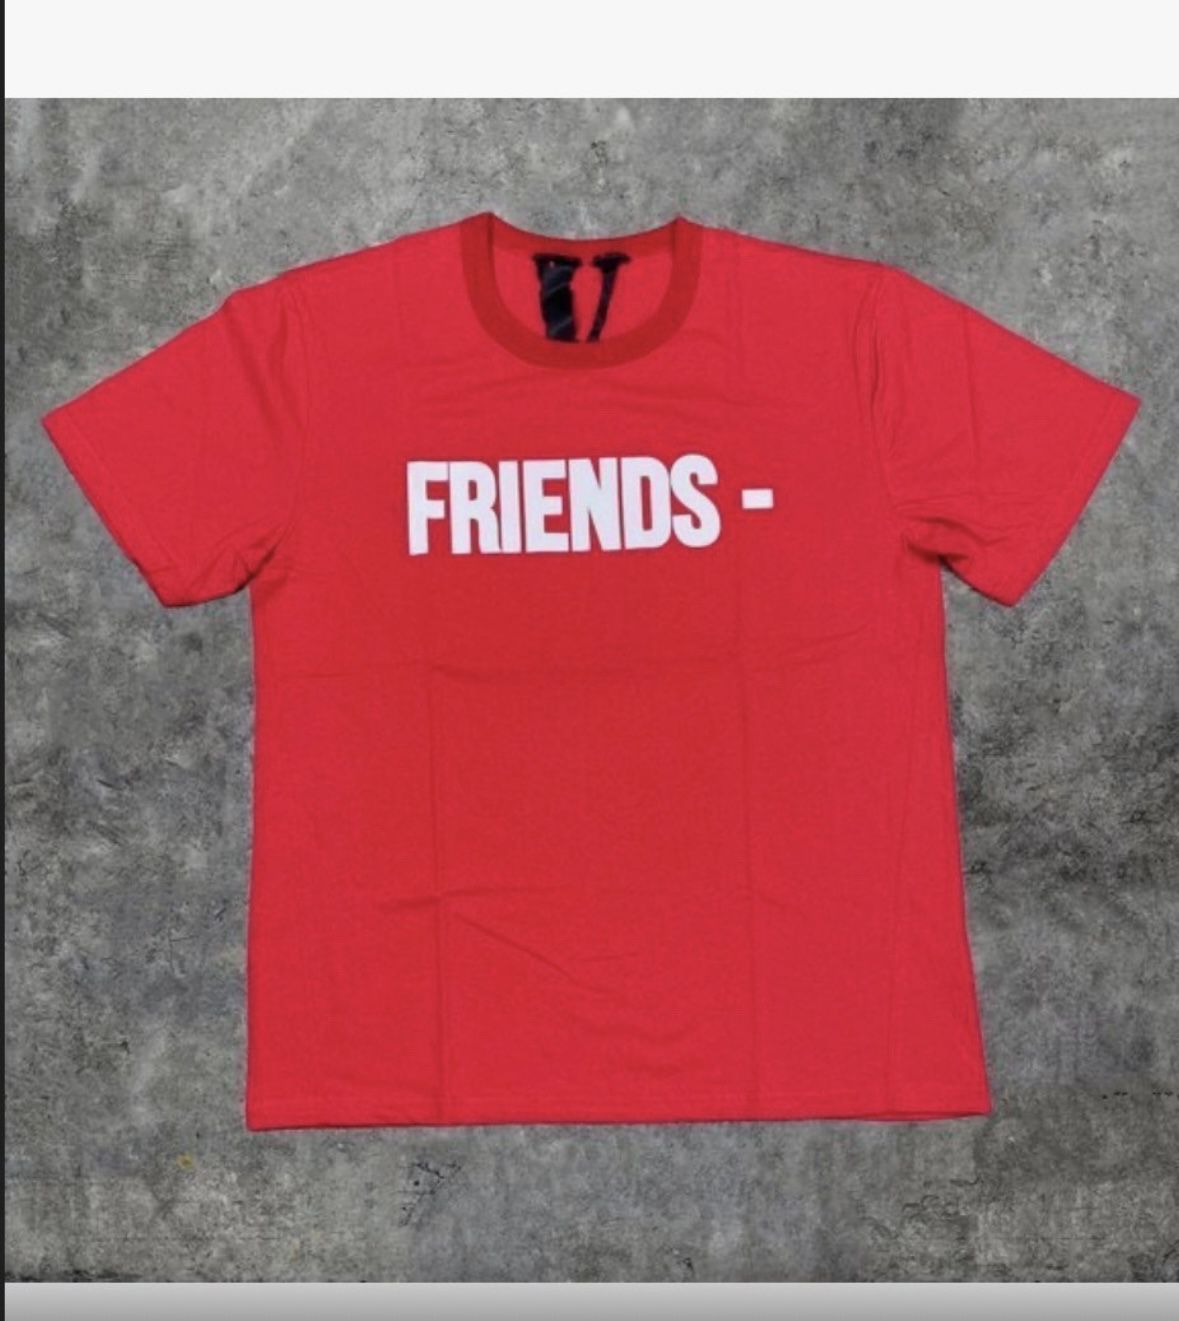 V Lone Friends Tee Red Shirt, White Lettering Never been worn.